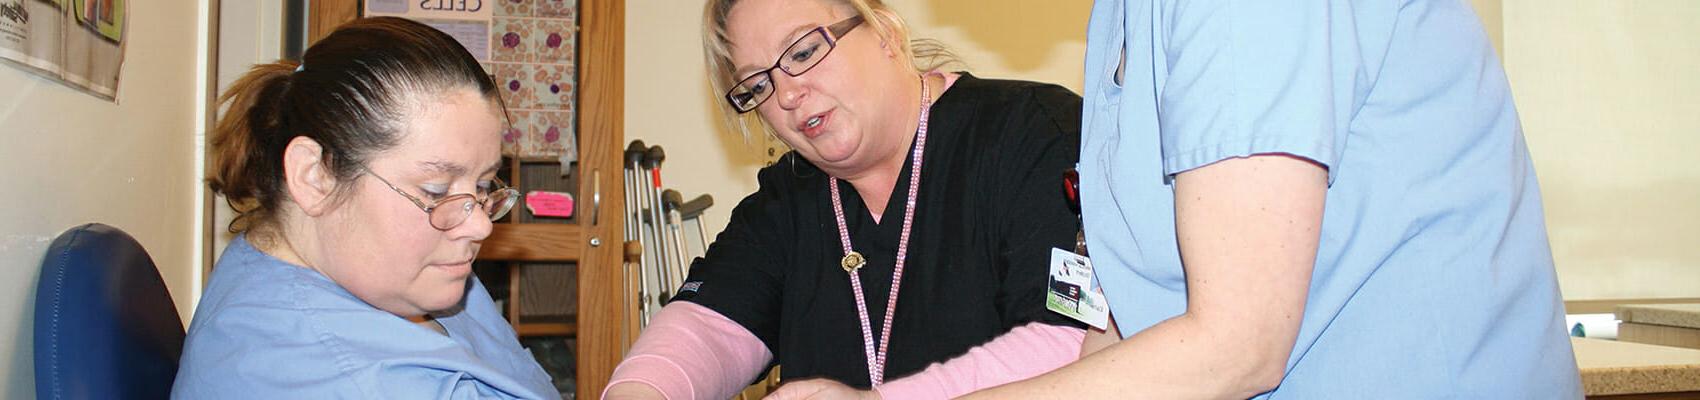 Phlebotomy instructor guiding student